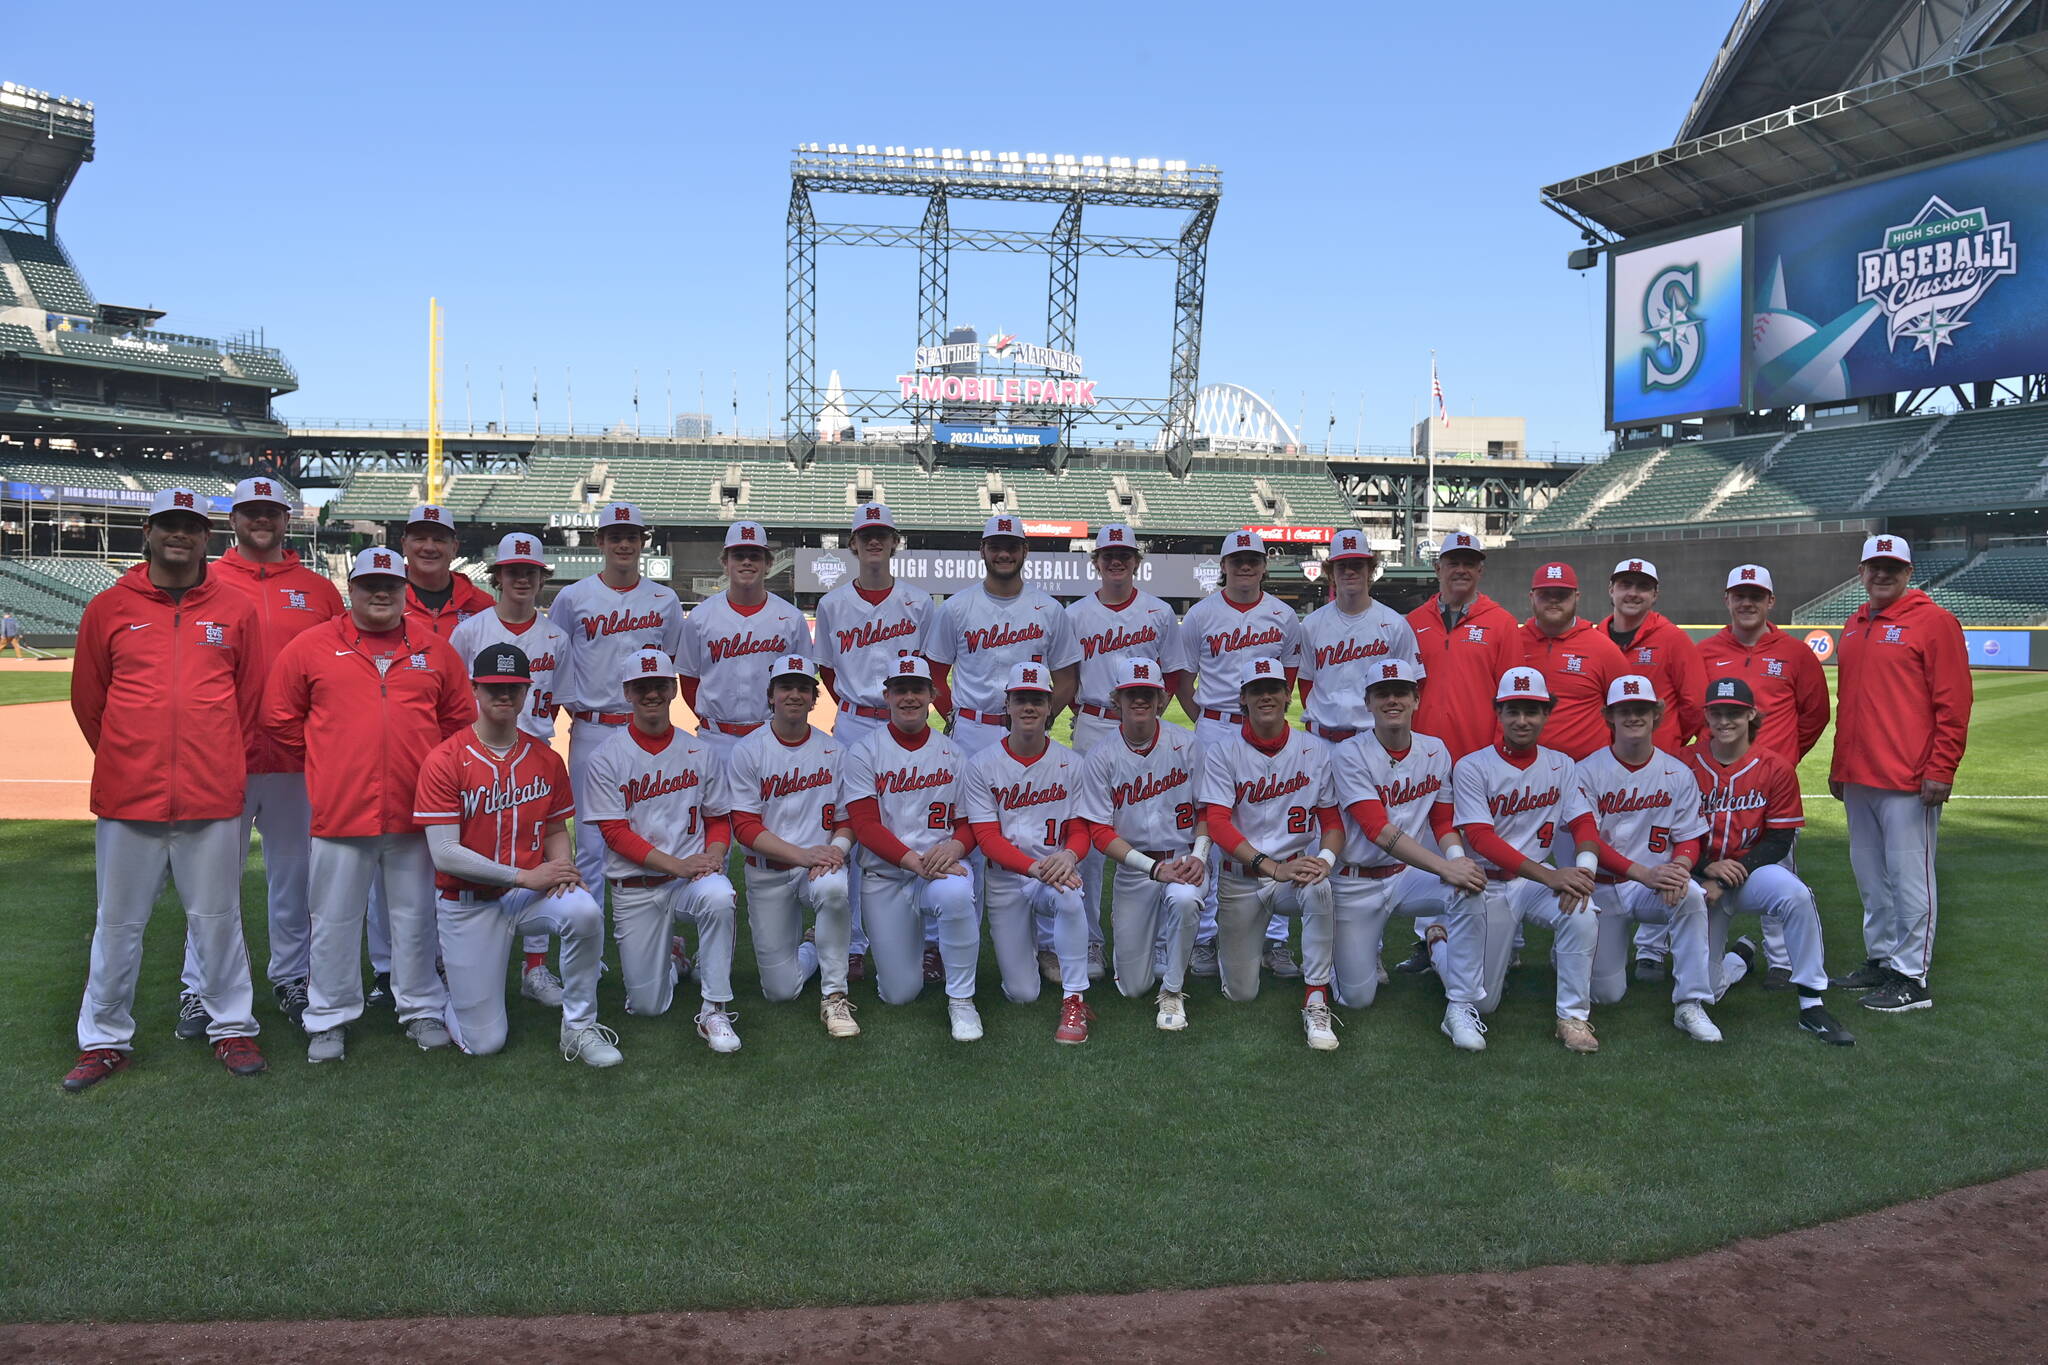 The Mount Si High School Baseball Team poses for a photo at T-Mobile Park before a 13-4 win over Eastside Catholic on March 18. Photo courtesy of Calder Productions.